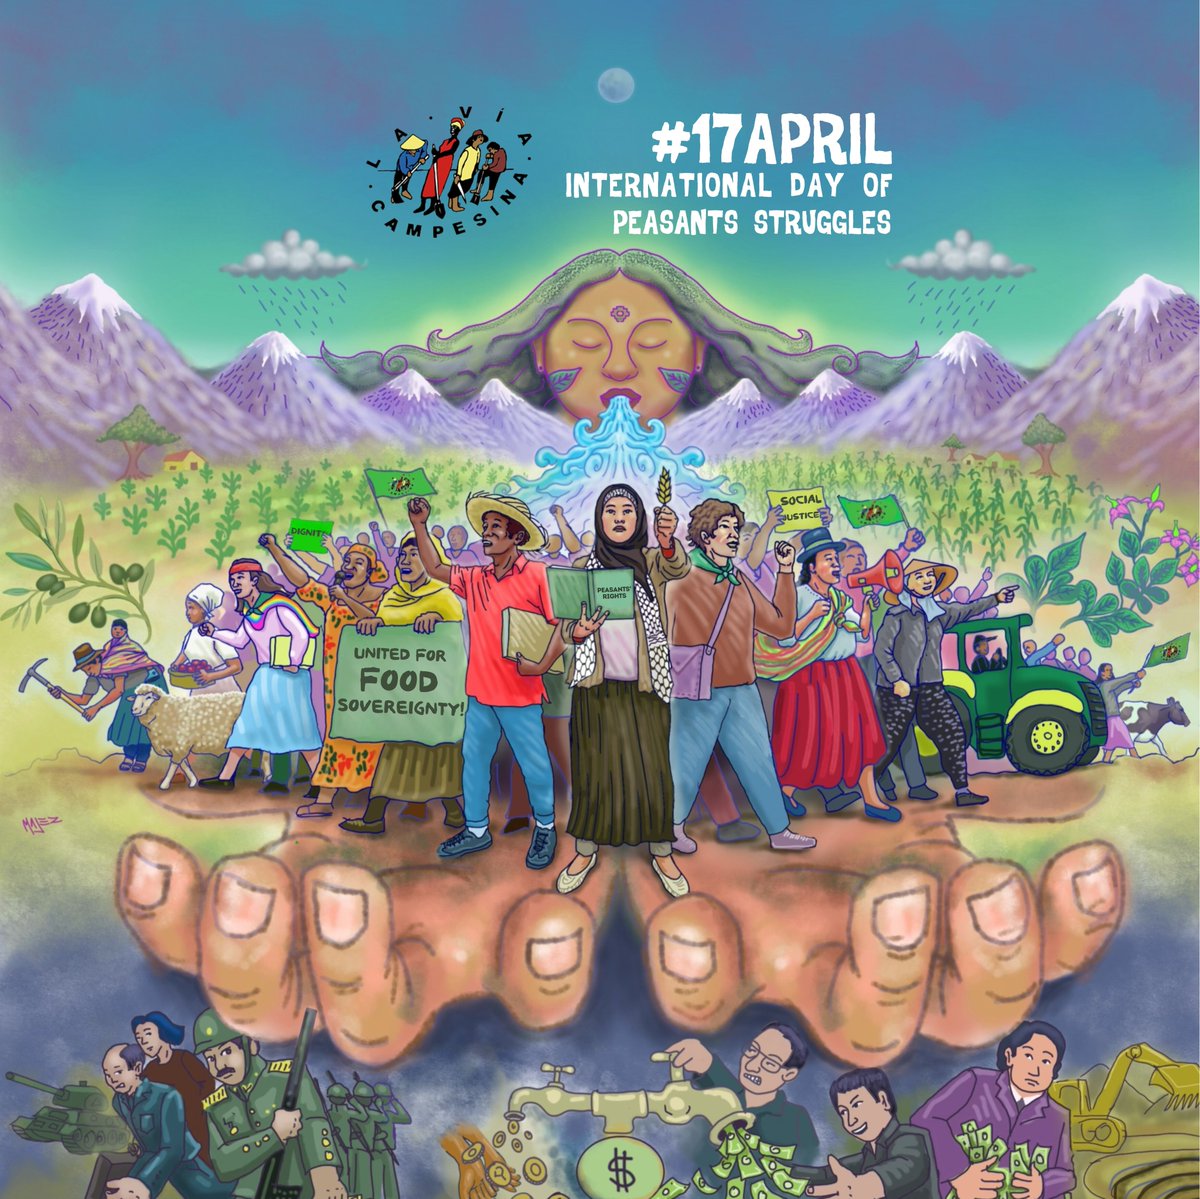 On this International Day of Peasants Struggles you can take action in solidarity with peasants in Mexico who are fighting to stop the threat of #GMO corn. cban.ca/tradeaction